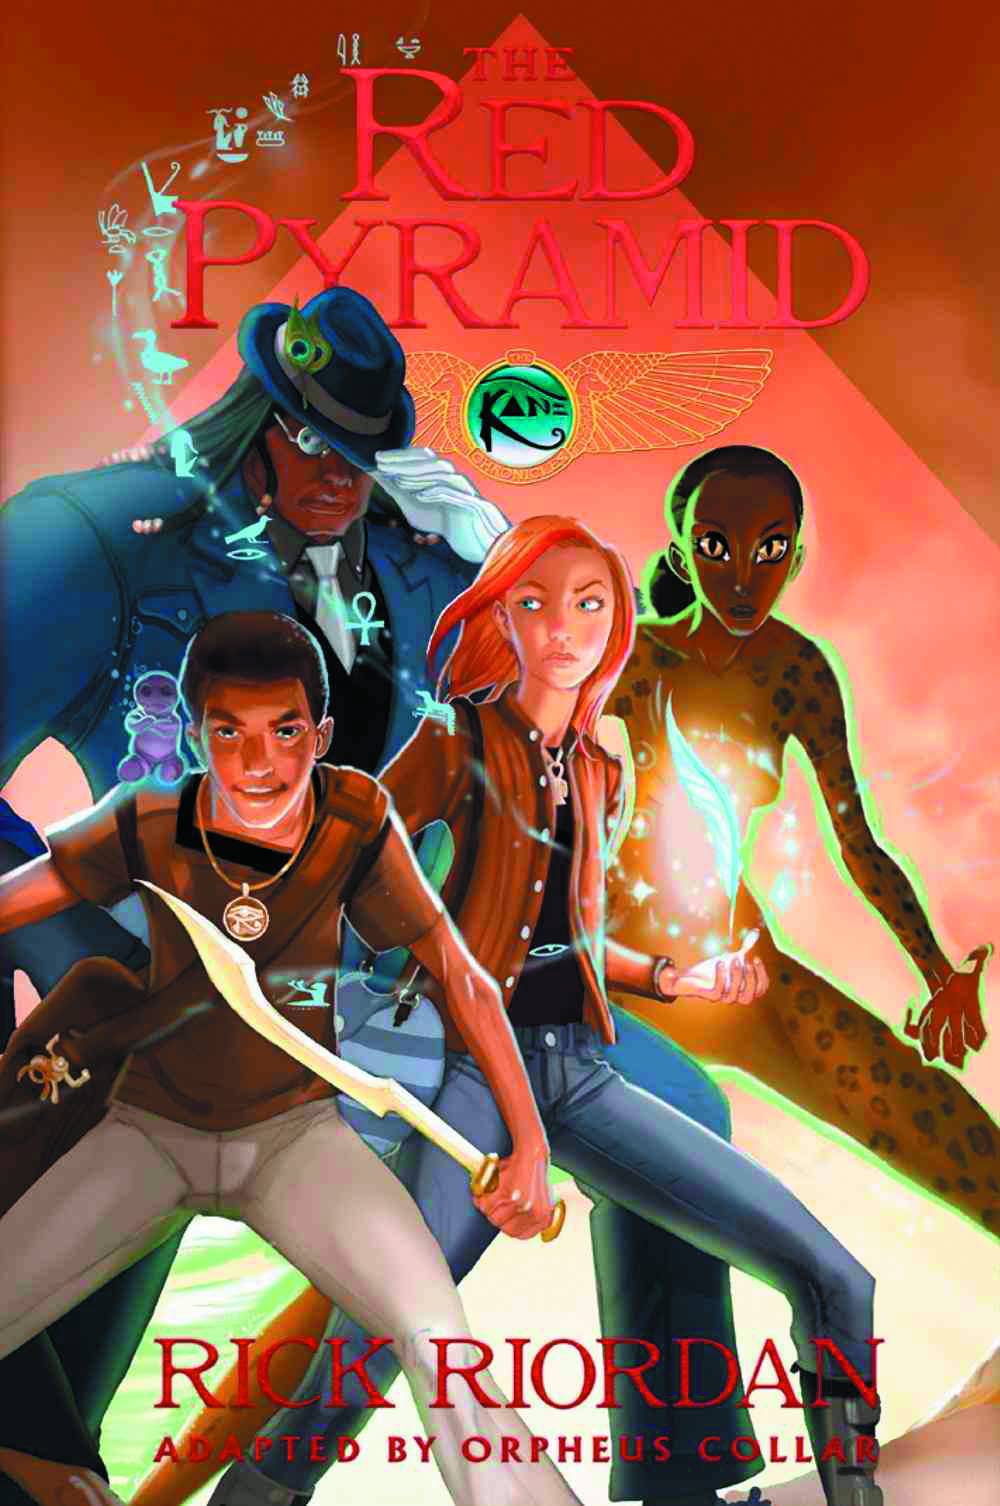 Kane Chronicles Graphic Novel Book 1 Red Pyramid